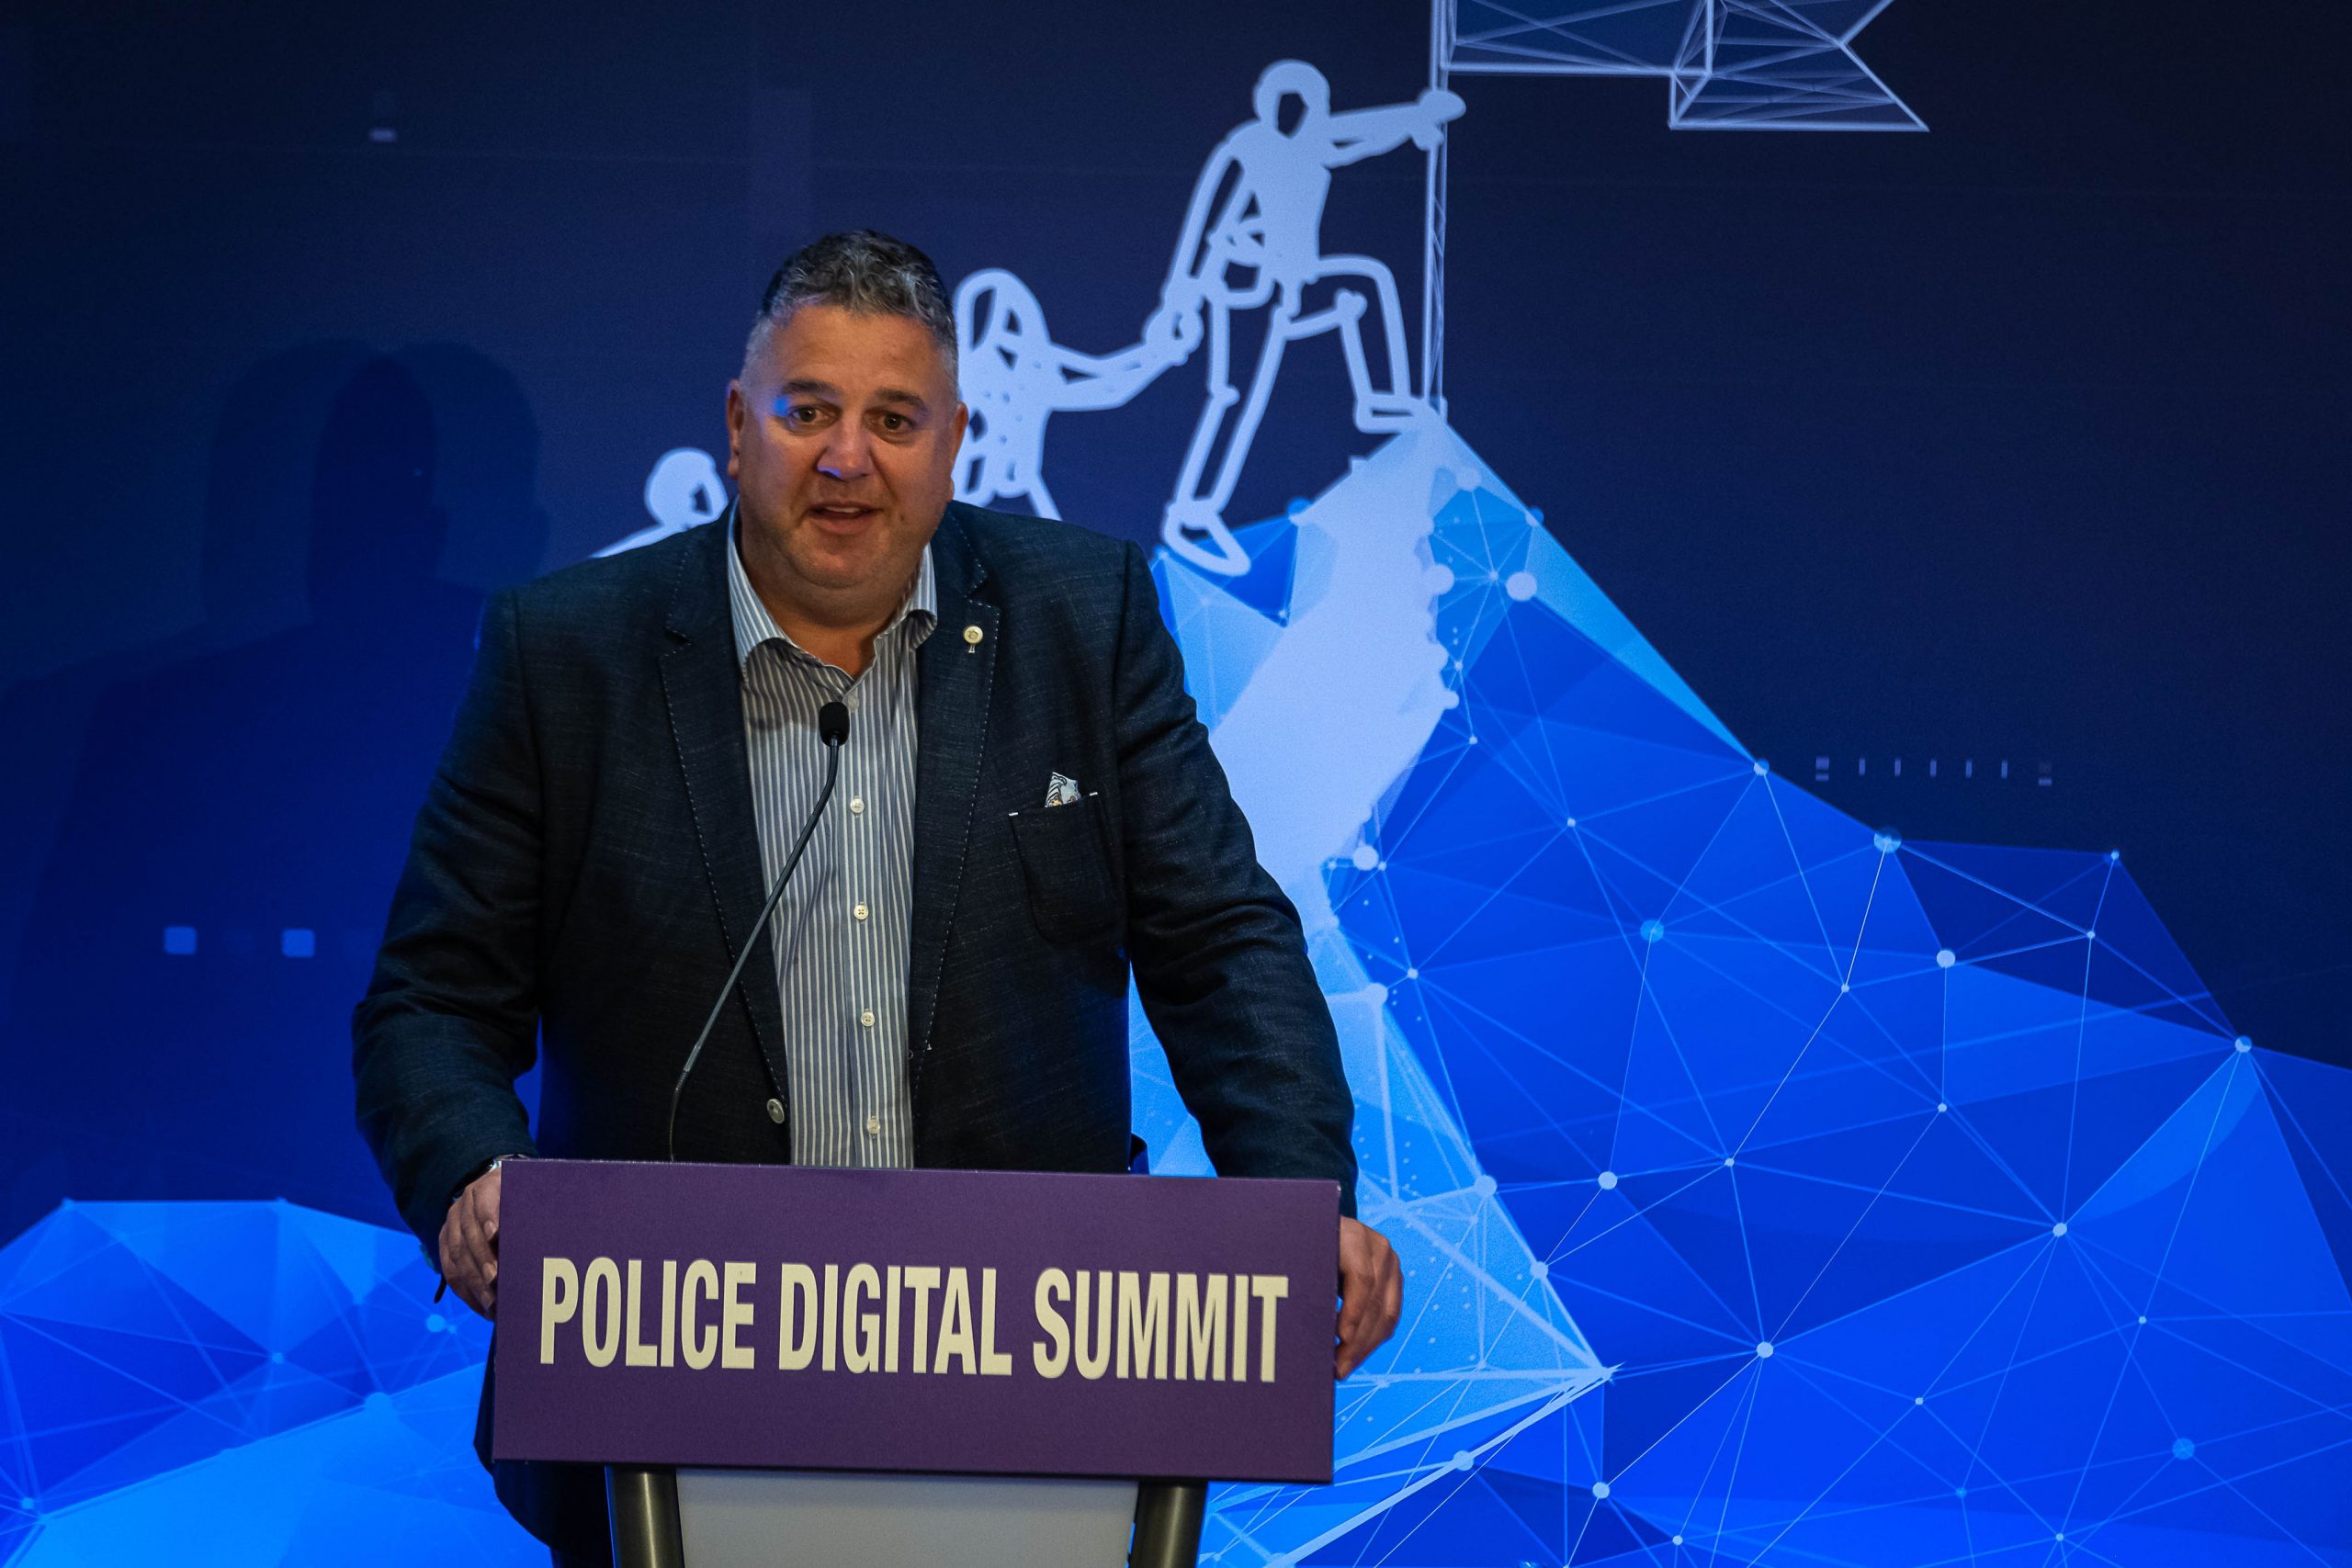 PDS CEO Ian Bell stands in front of a backdrop showing a mountain being scaled by three climbers who are tied together. The lead climber is staking a flag in the summit of the mountain. Ian rests his hand on a lectern which has a purple sign reading "Police Digital Summit" on the front of it. He is dressed in a navy blue blazer over a pale blue shirt.